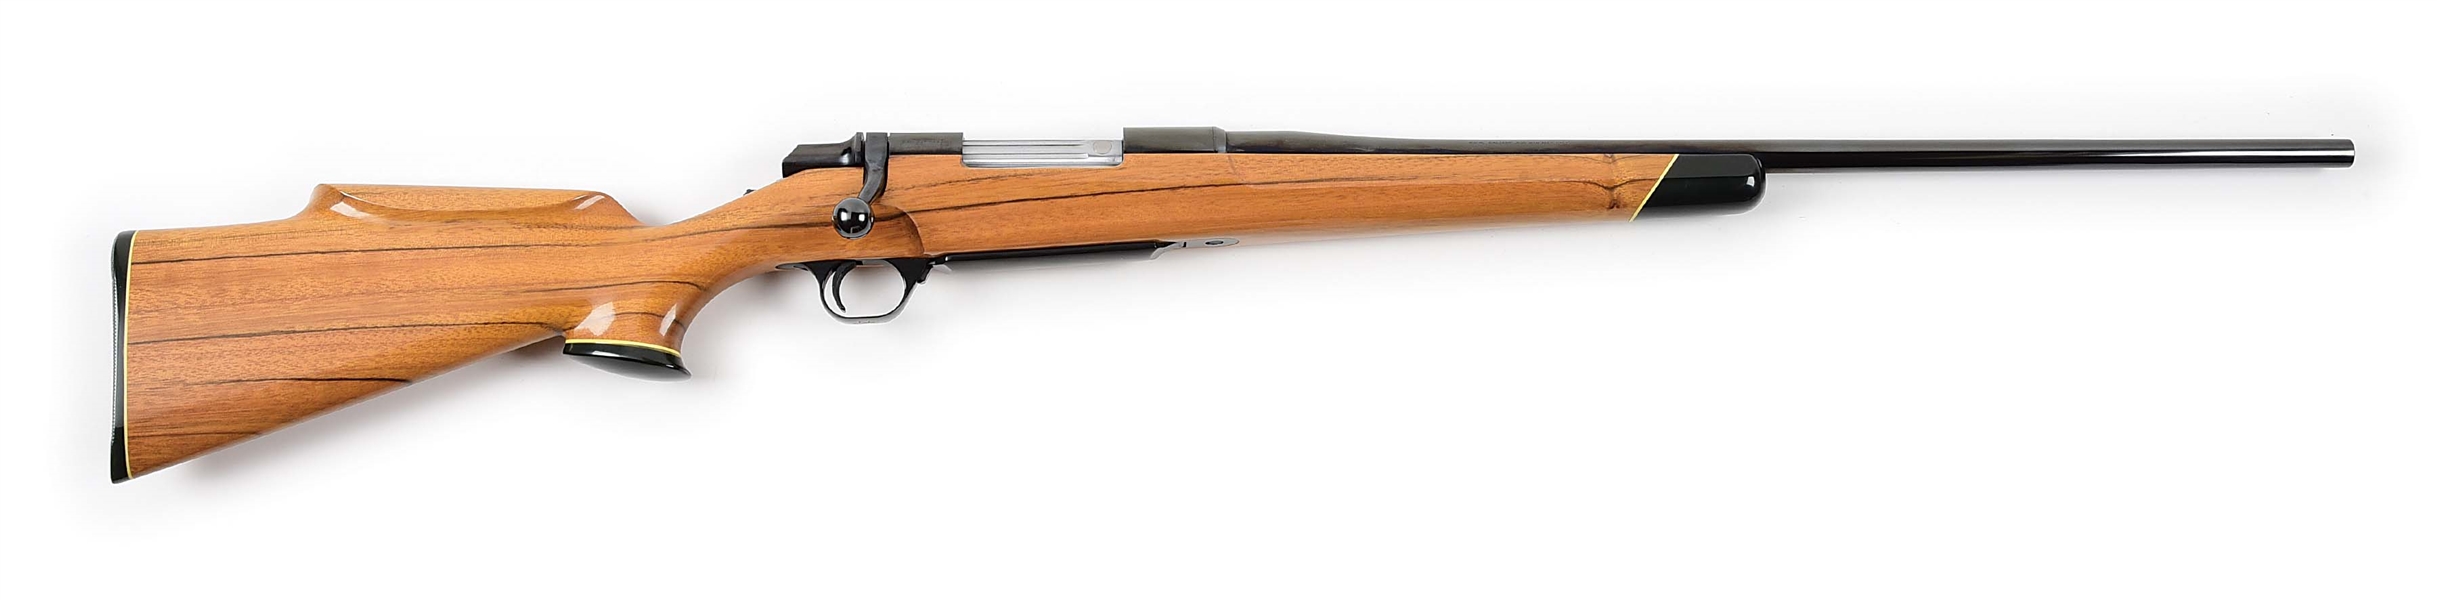 (M) BROWNING BBR BOLT ACTION RIFLE WITH NEW GUINEA WALNUT STOCK.